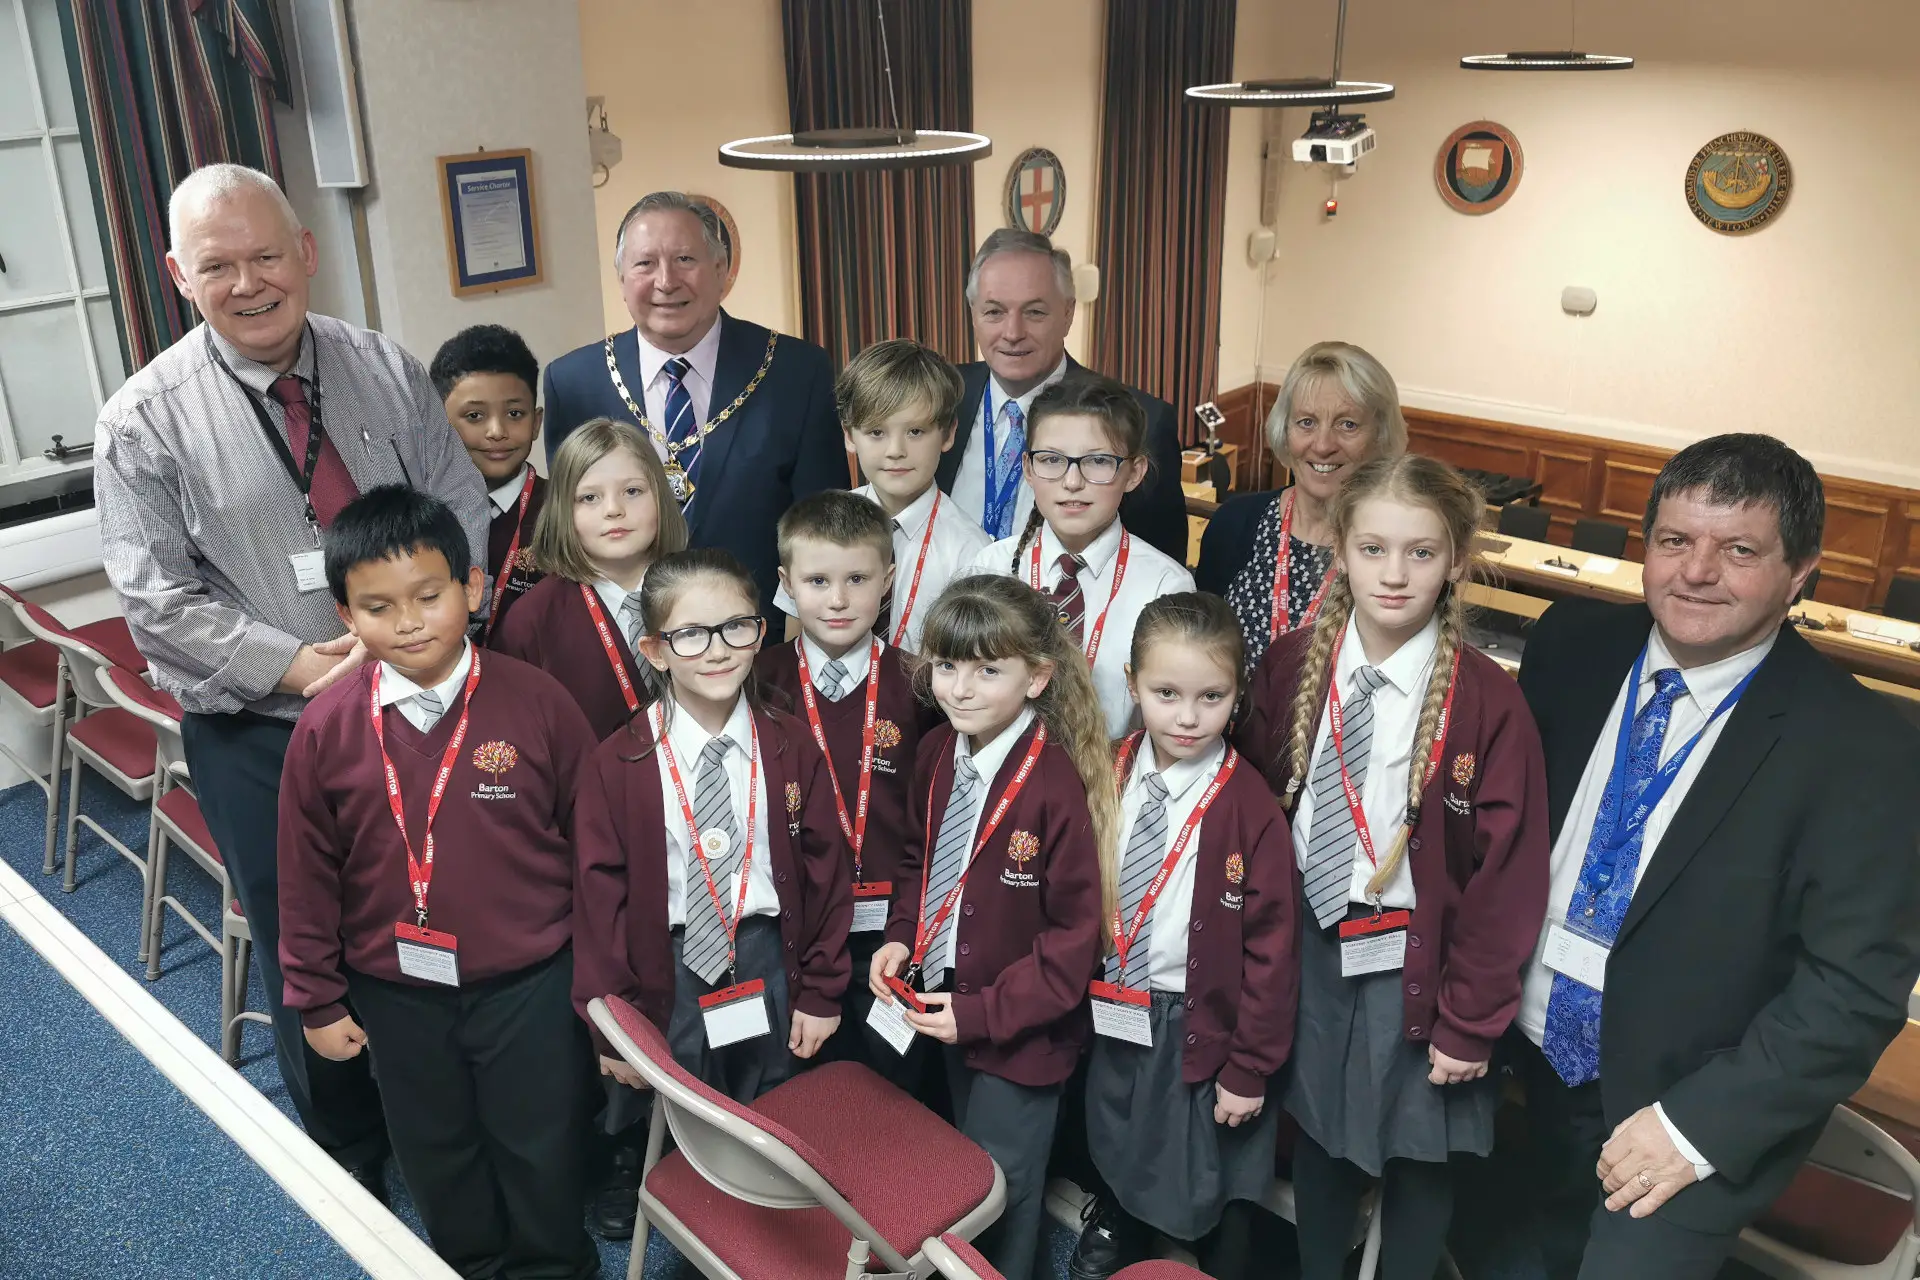 Barton Primary School visit to the council